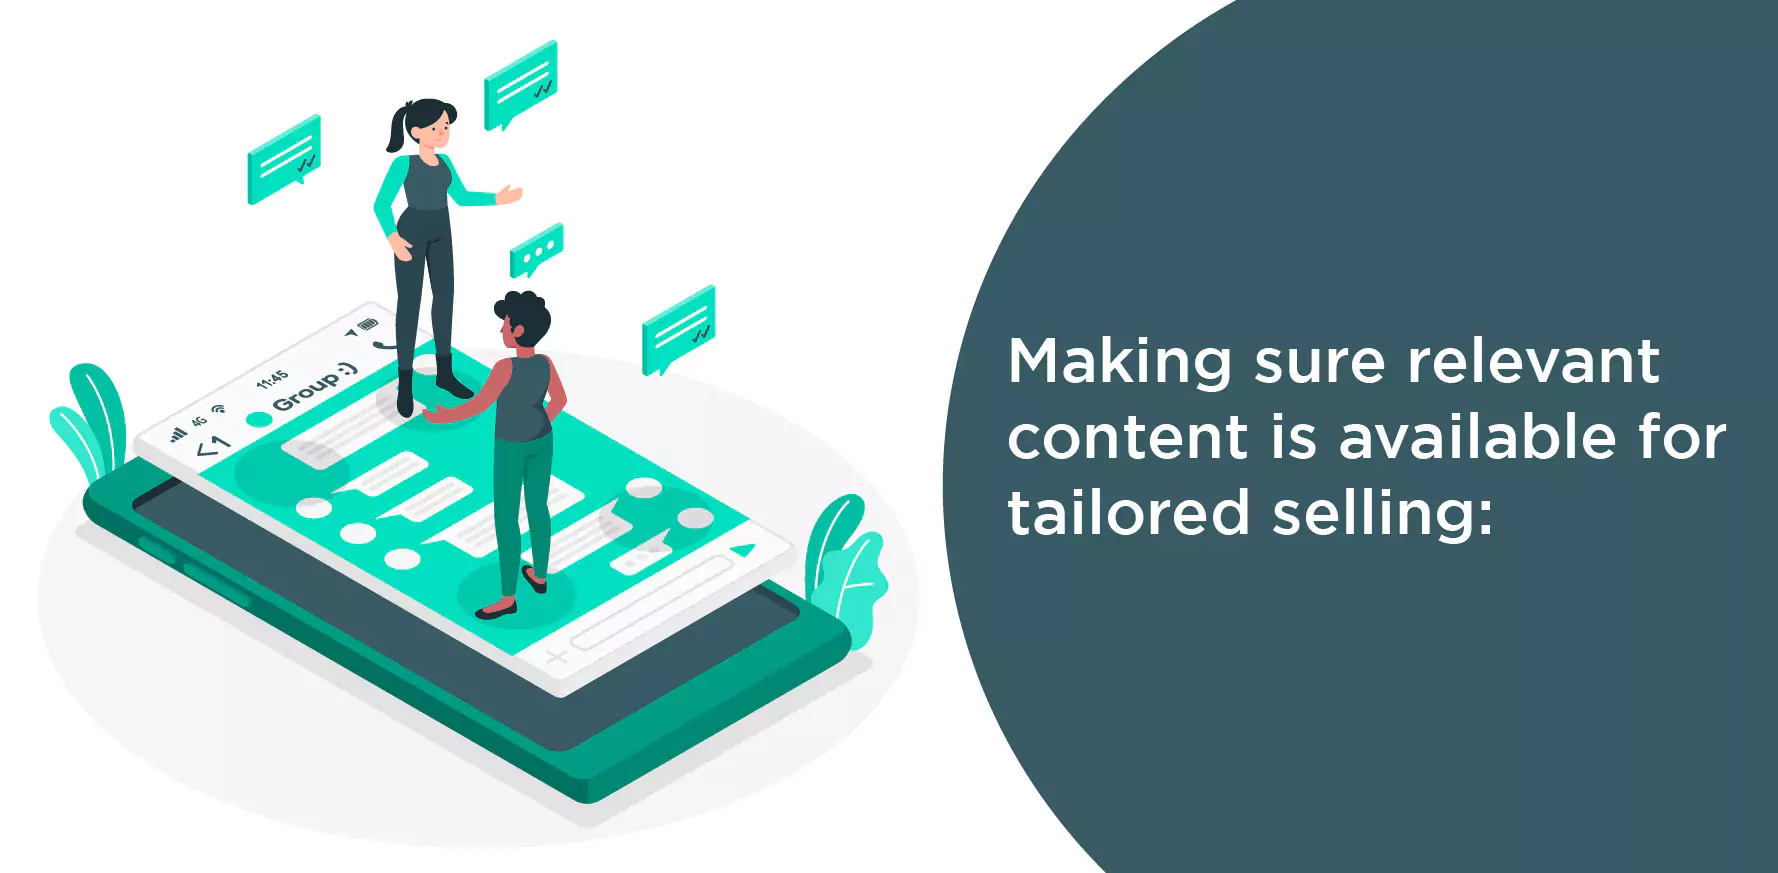 Making sure relevant content is available for tailored selling: